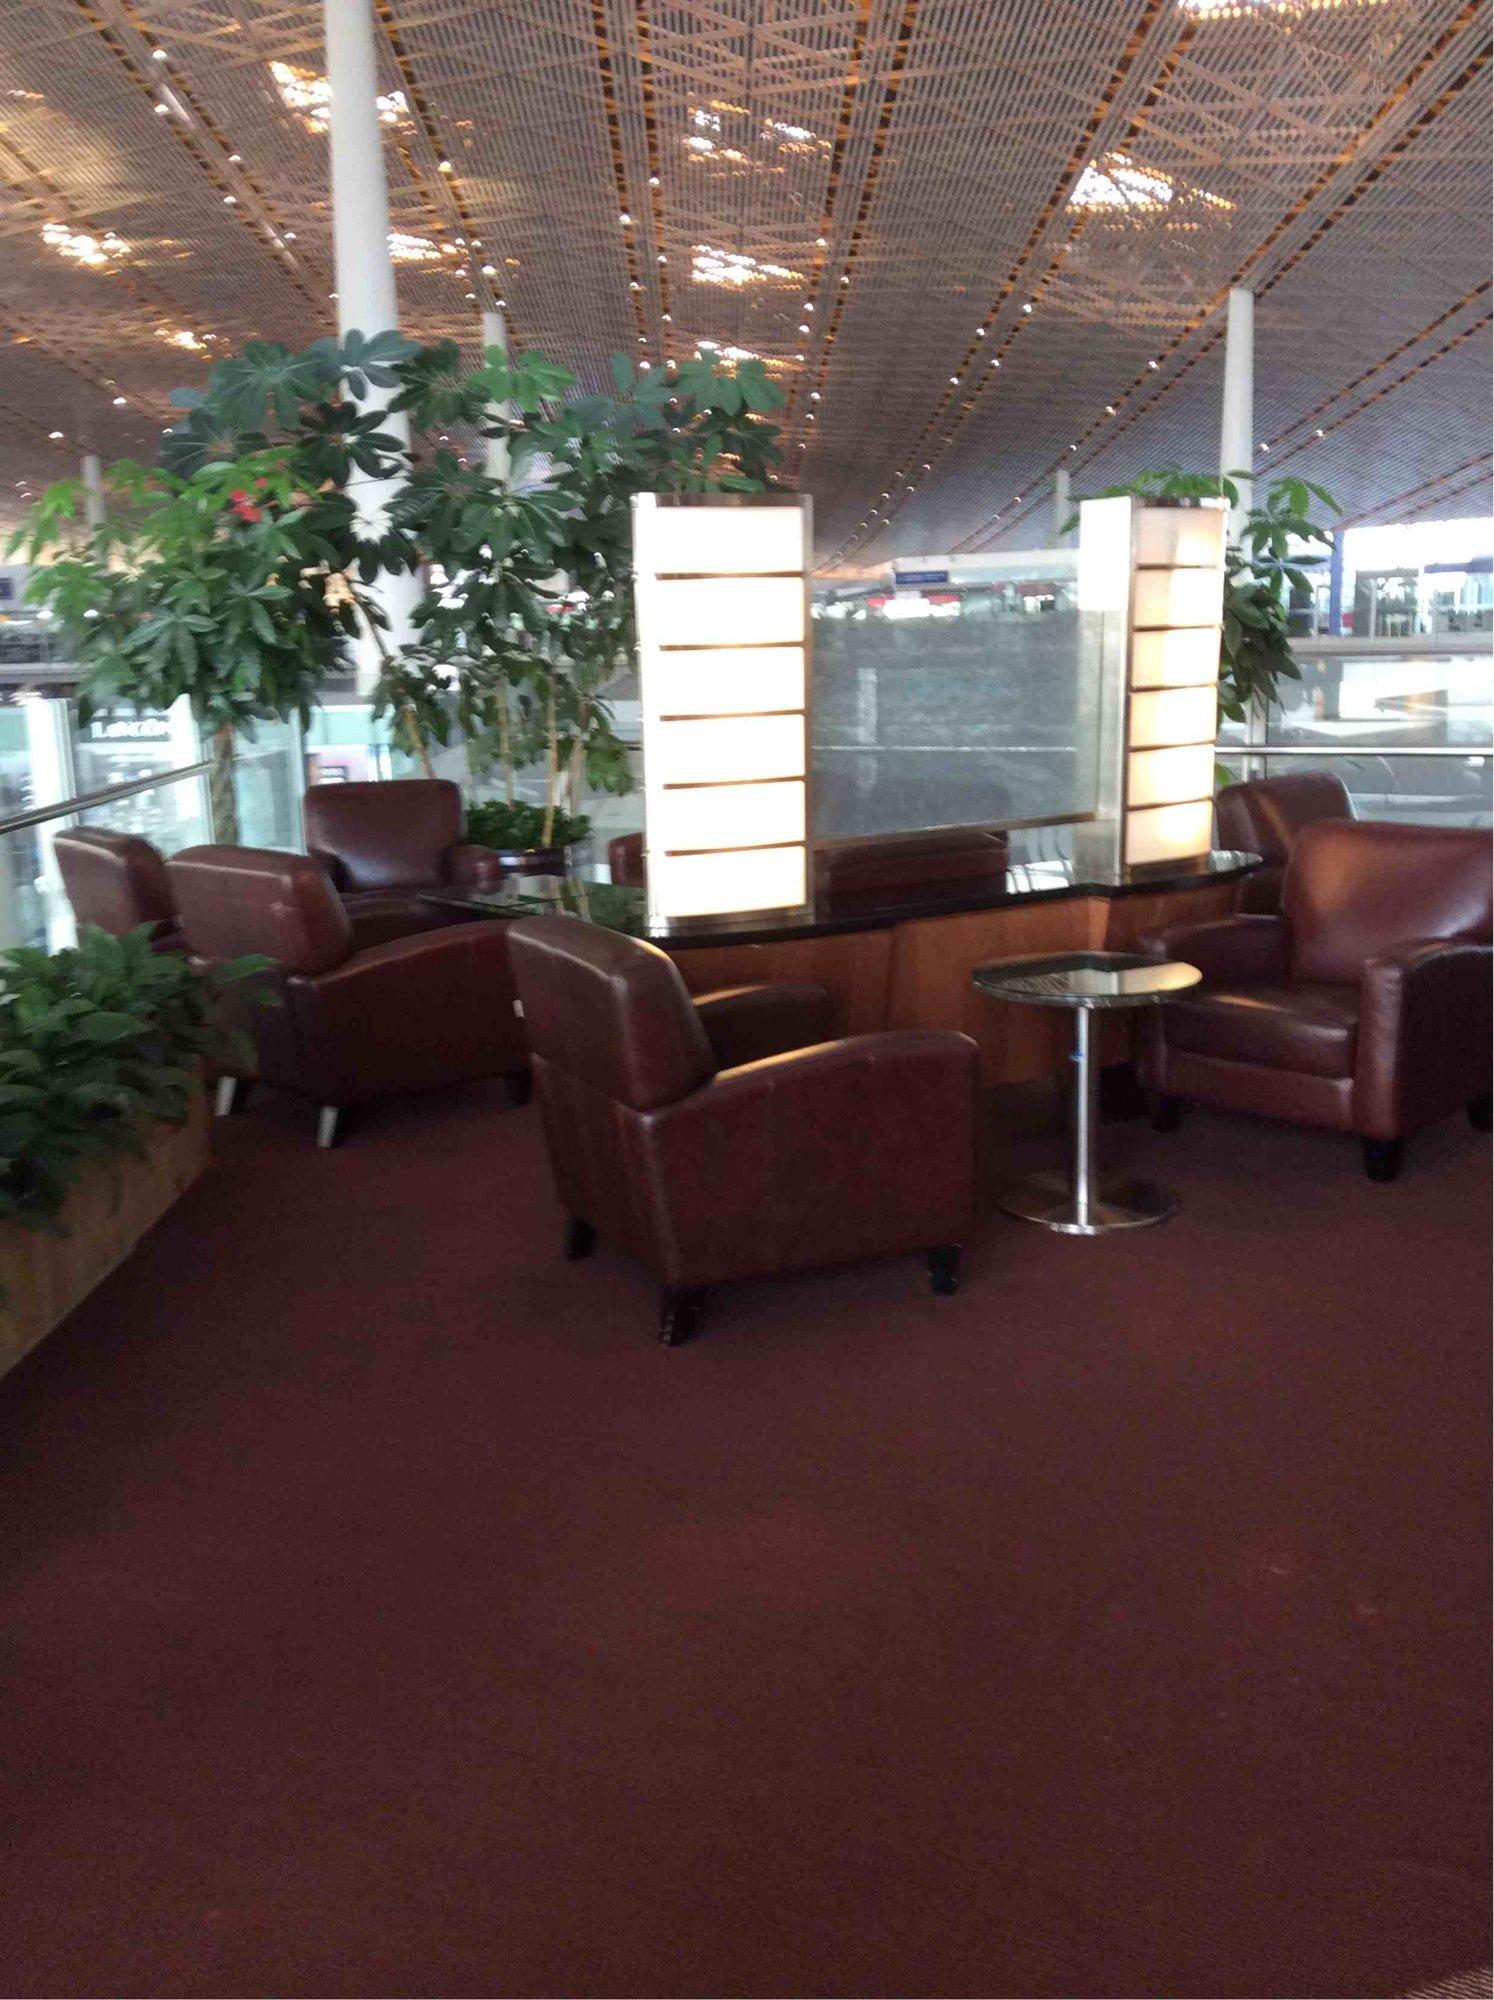 Air China International First Class Lounge image 38 of 38